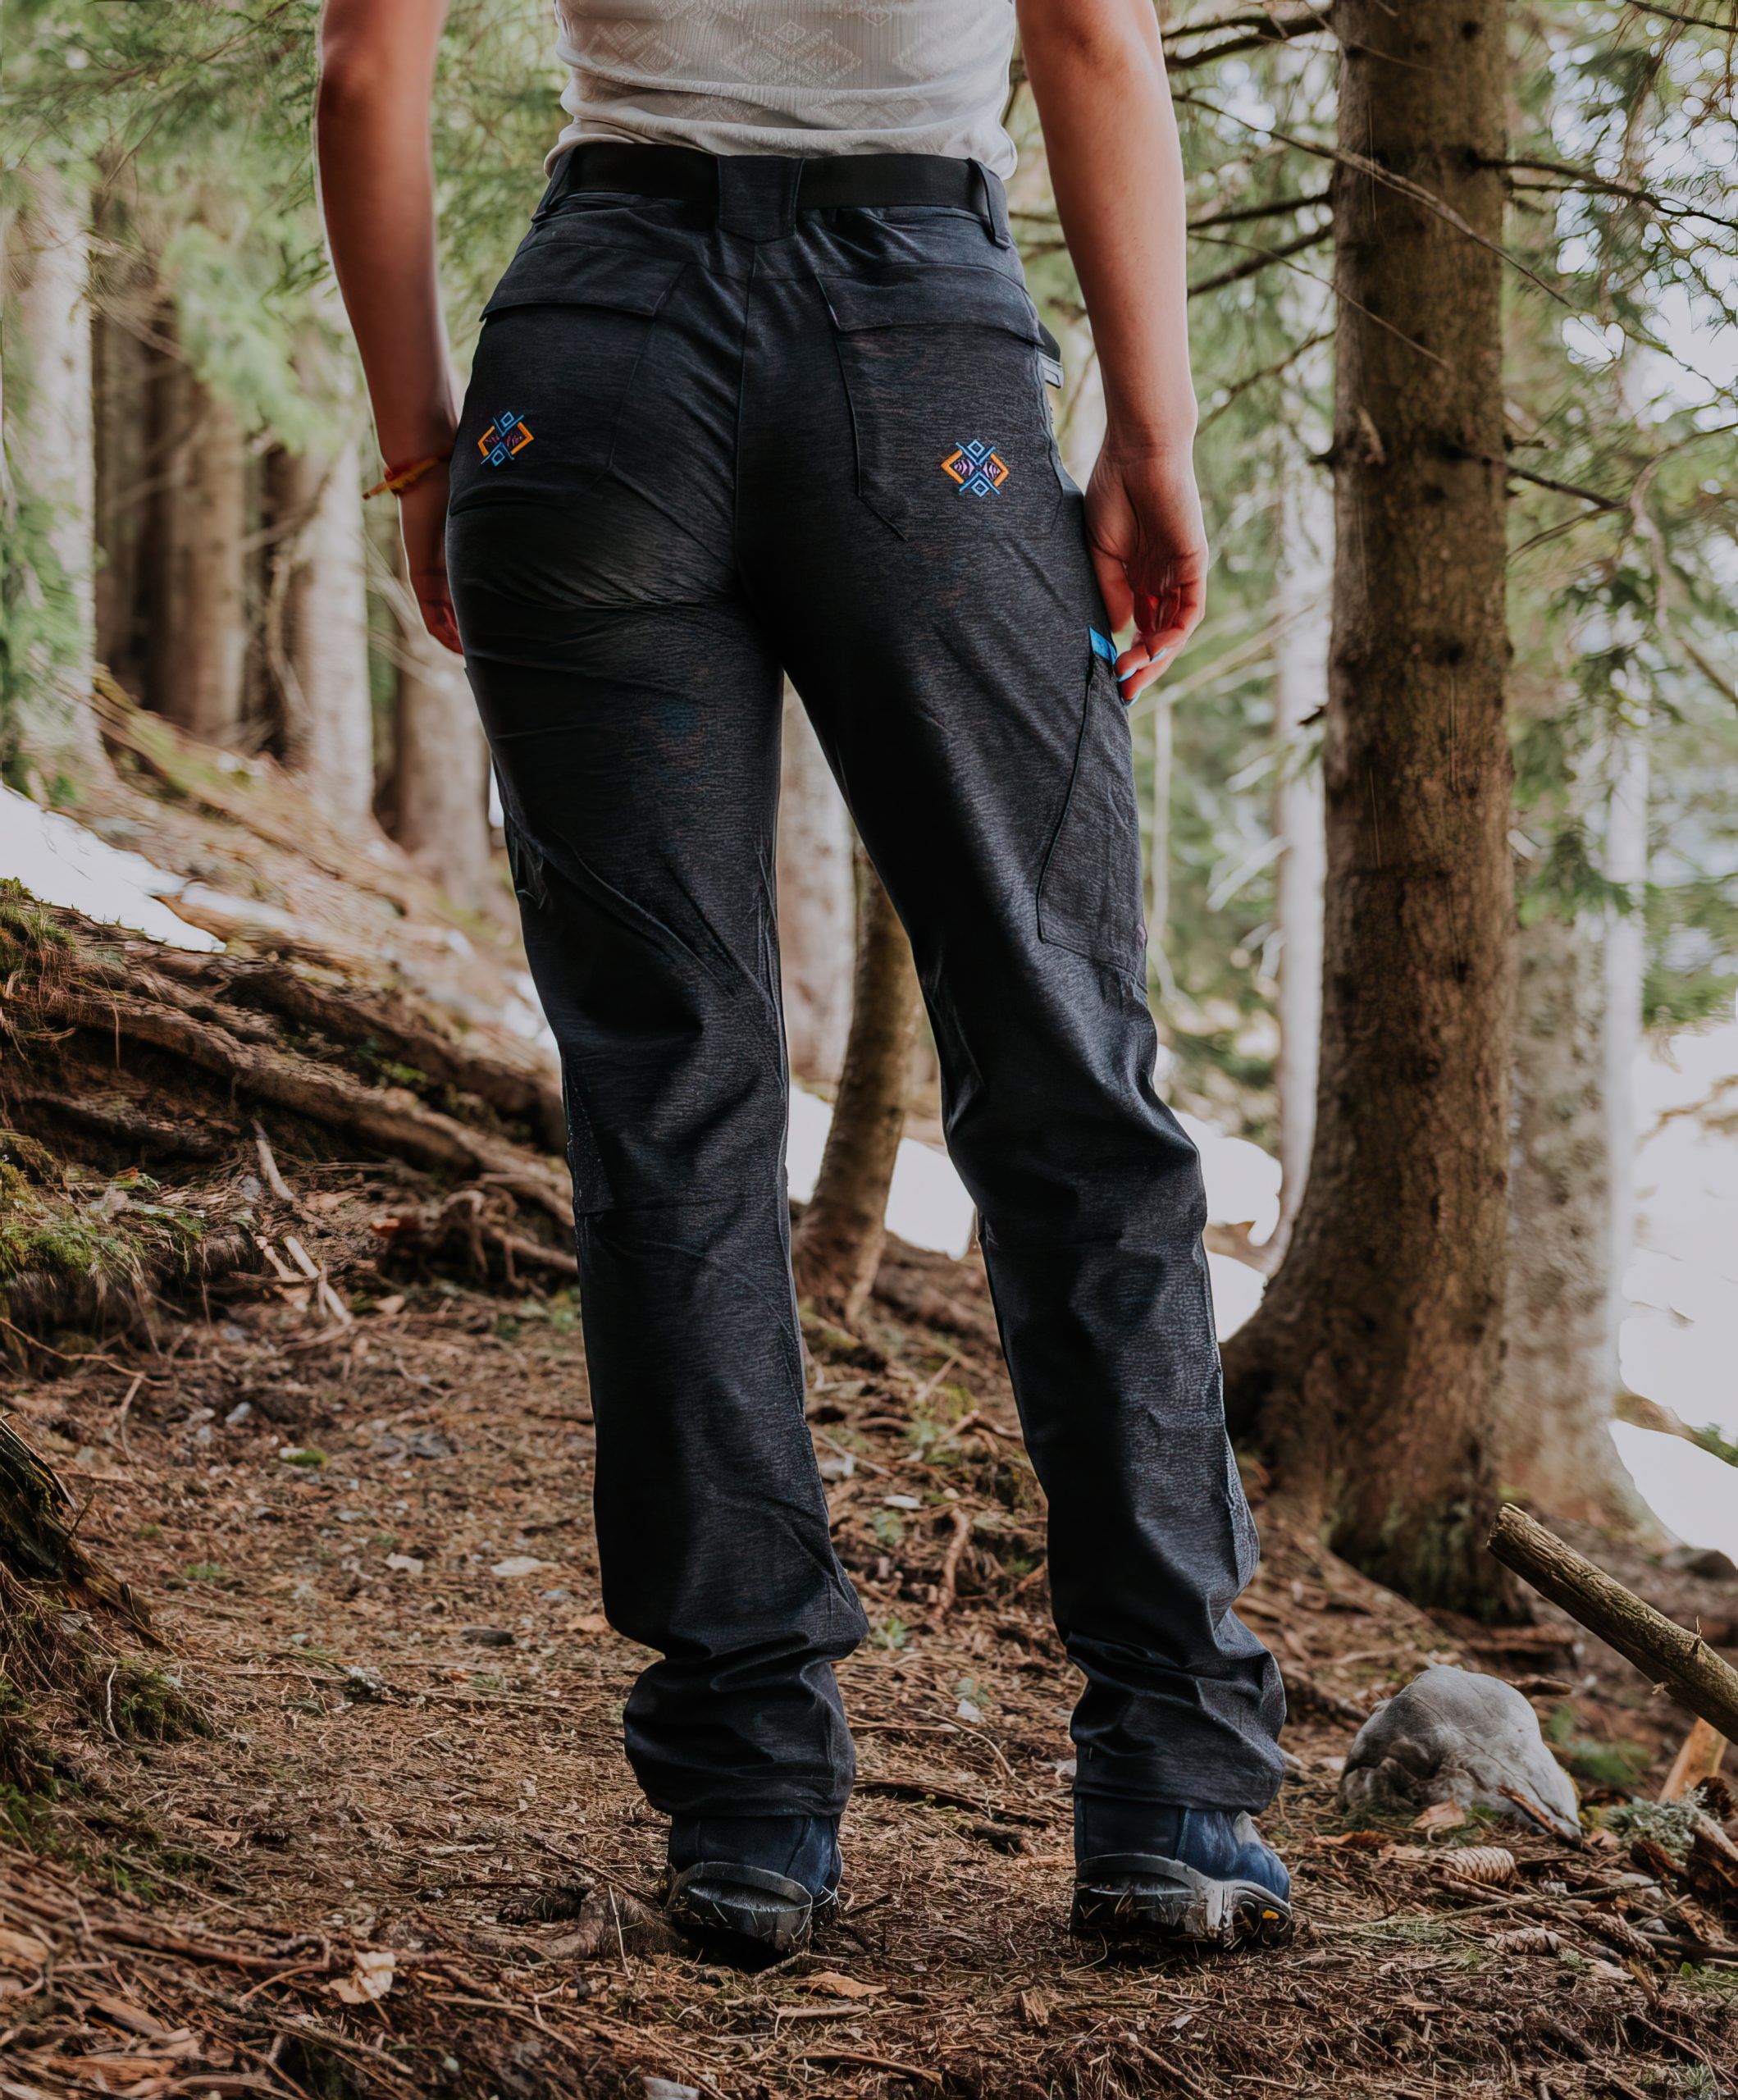 Chel pants black for hiking from MAYA MAYA are 4-way stretch and light for women in the summer.